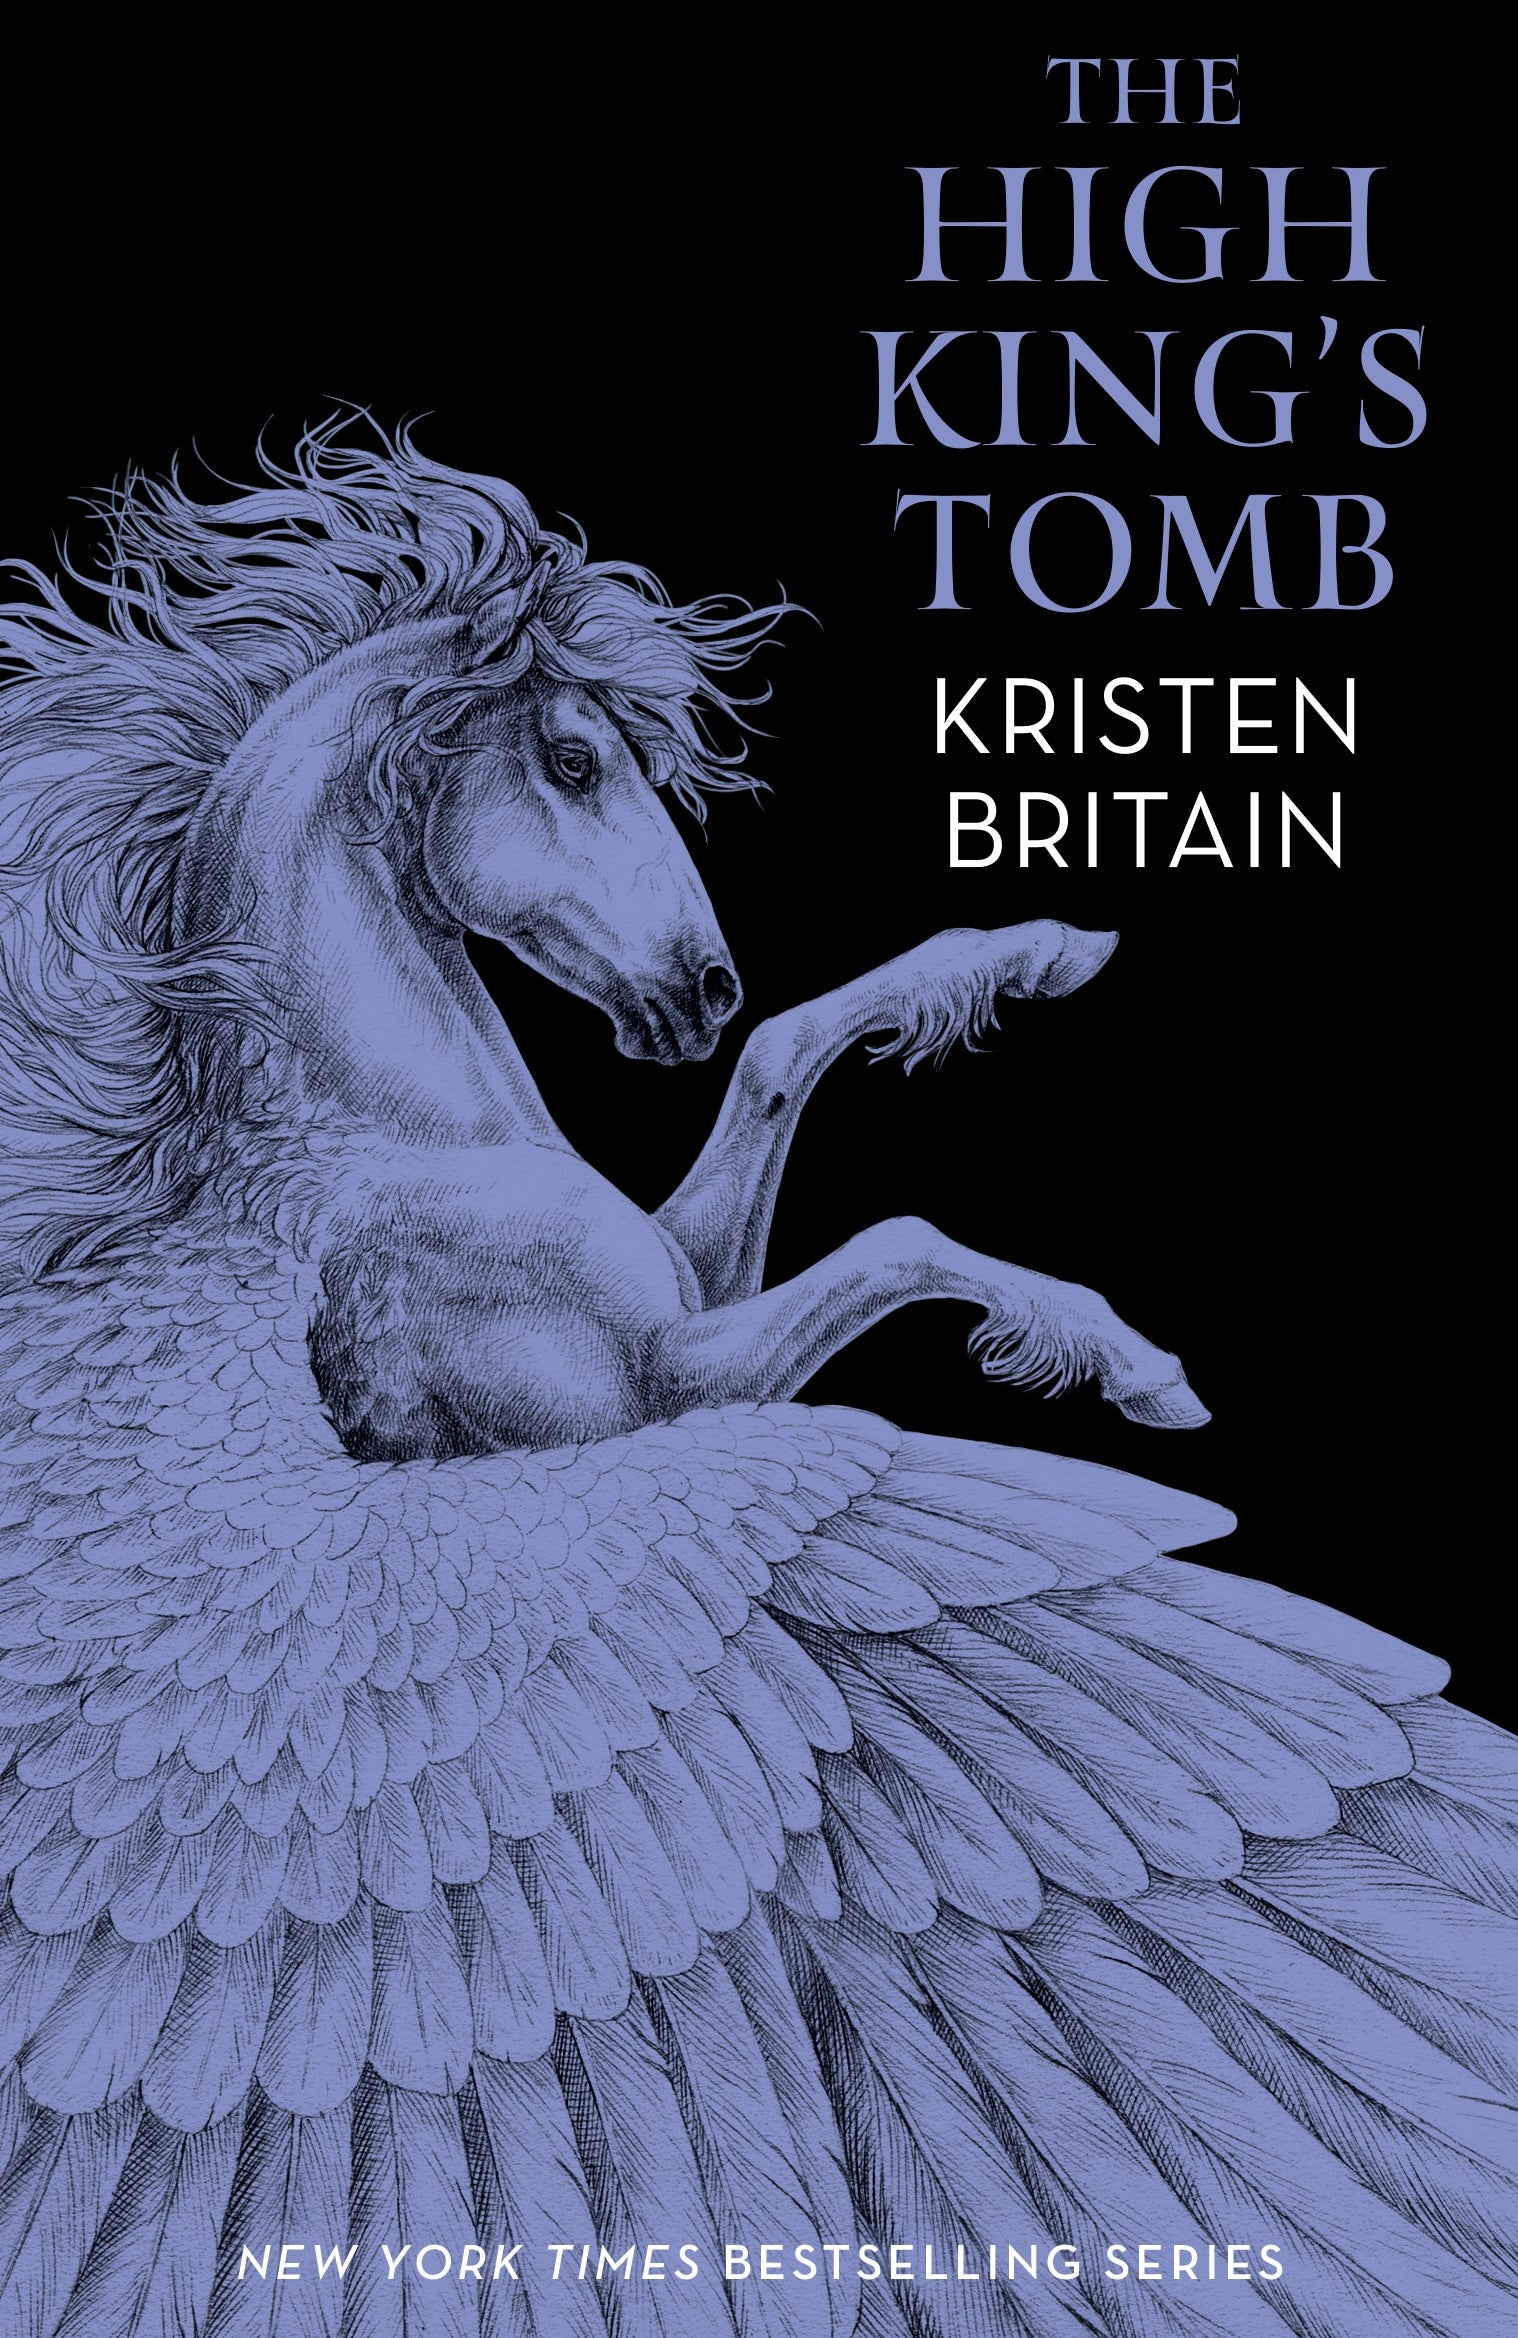 The High King's Tomb by Kristen Britain